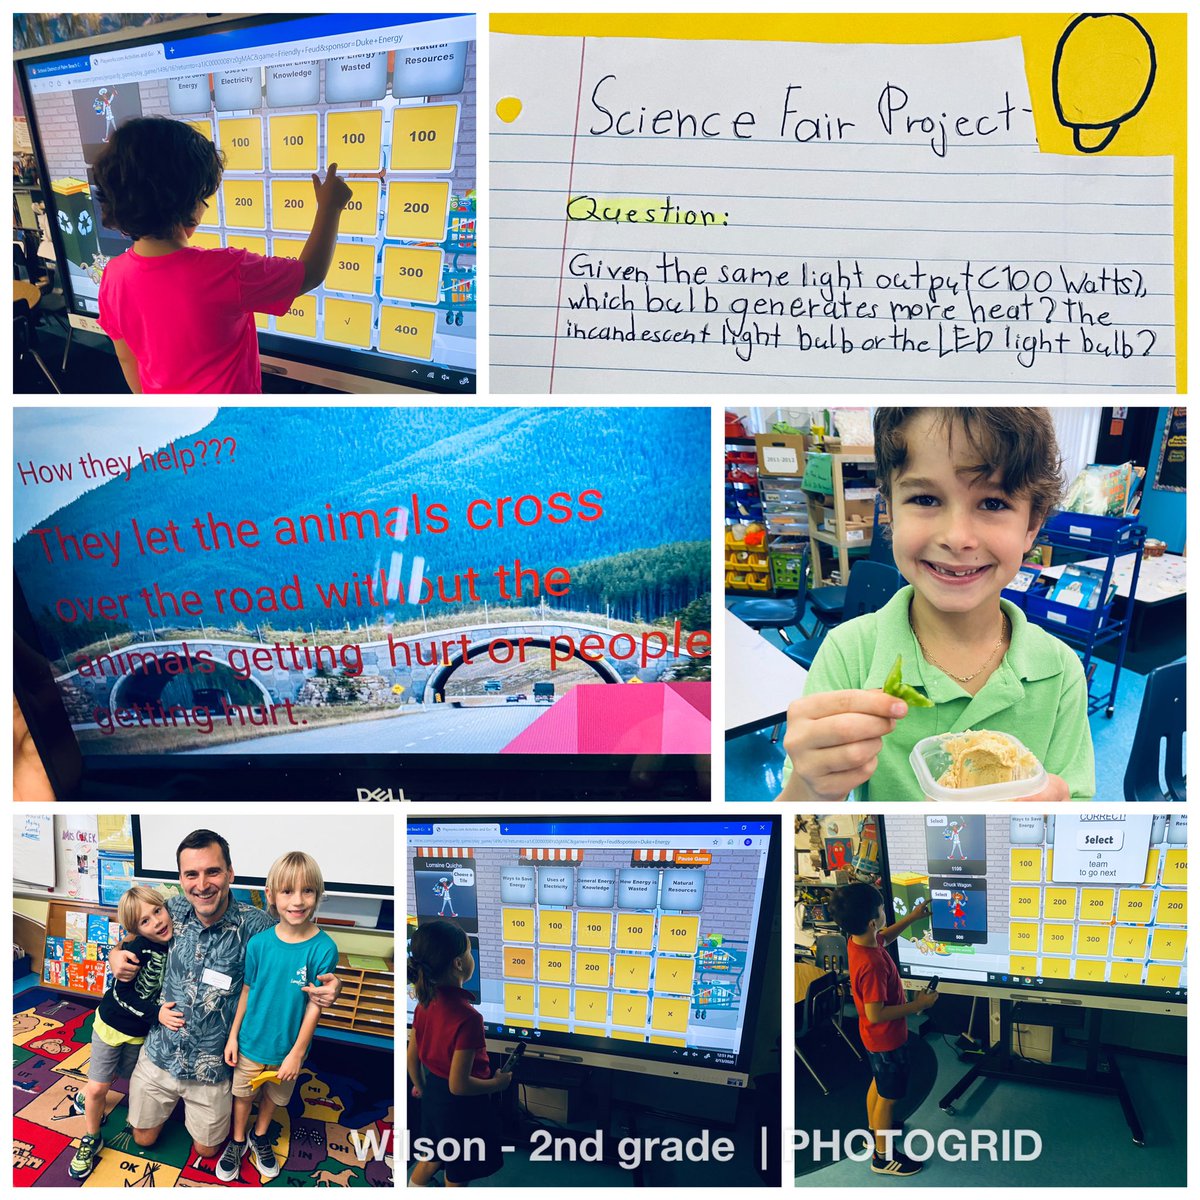 Science: FPL’s Energy jeopardy, science fair project on incandescent vs. LED light bulbs finished, a student enjoying a sweet green pepper from our garden, Ss researching animal land bridges & a special birthday celebration. #Energy @insideFPL @PBCSTEM @PrincipalLCE @leafrivera1